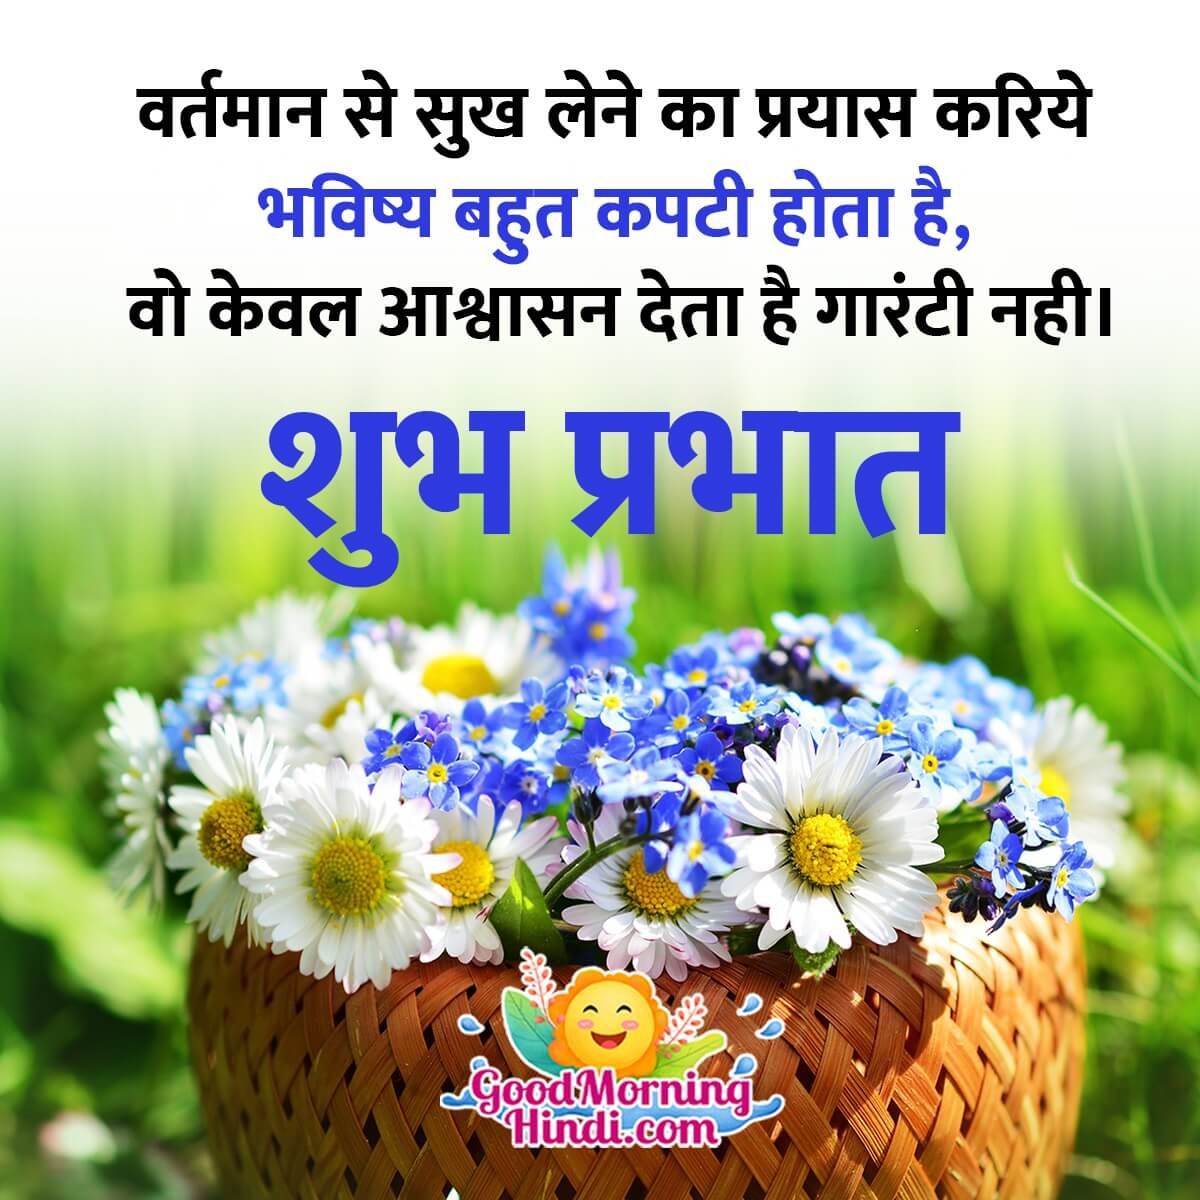 Astonishing Collection of Full 4K Good Morning Images with Hindi Quotes – 999+ Top Picks